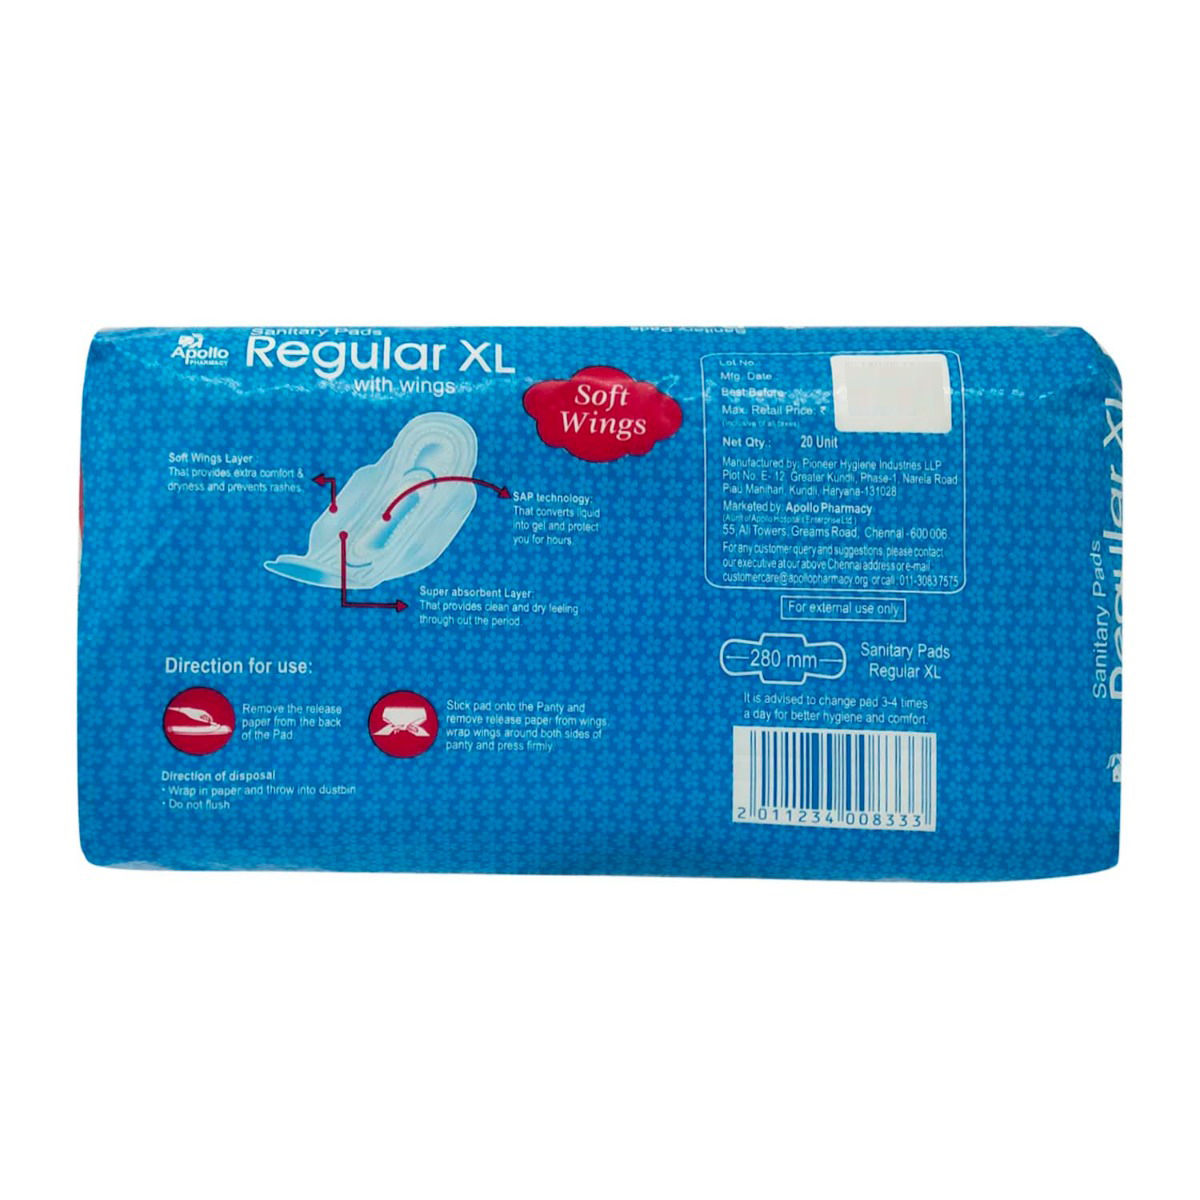 Apollo Pharmacy Regular Sanitary Pads XL, 20 Count, Pack of 1 